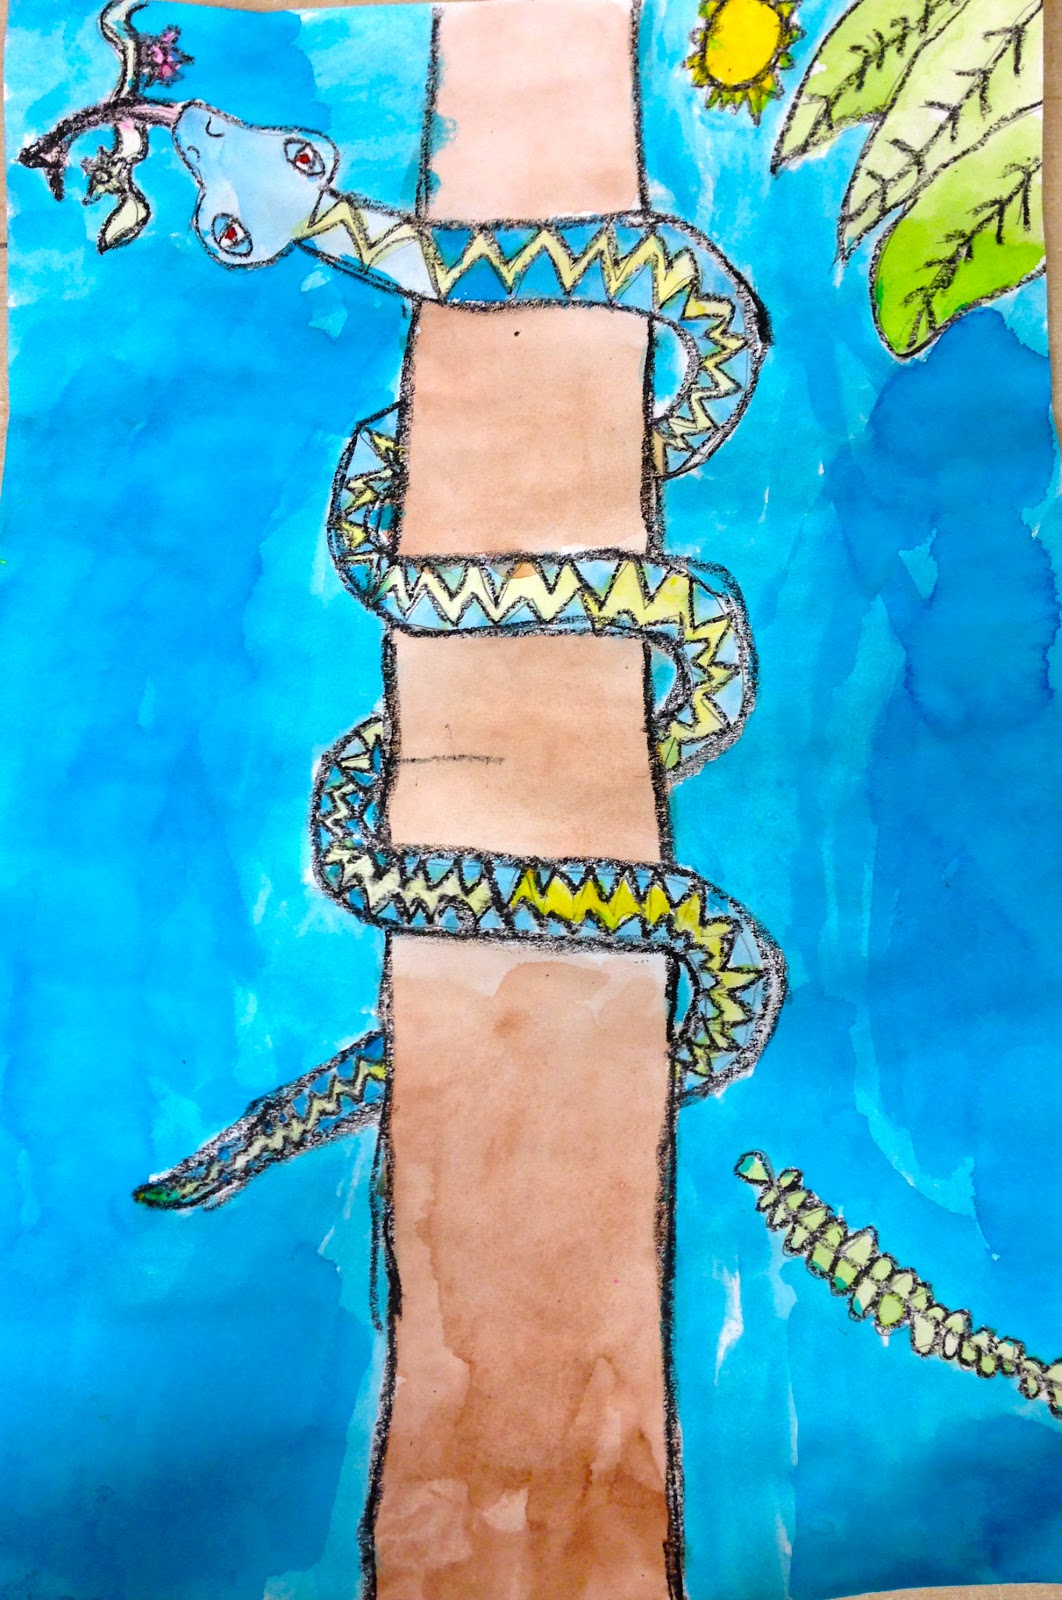 A painting shows a tree stump with a snake painted around it (second grade art)